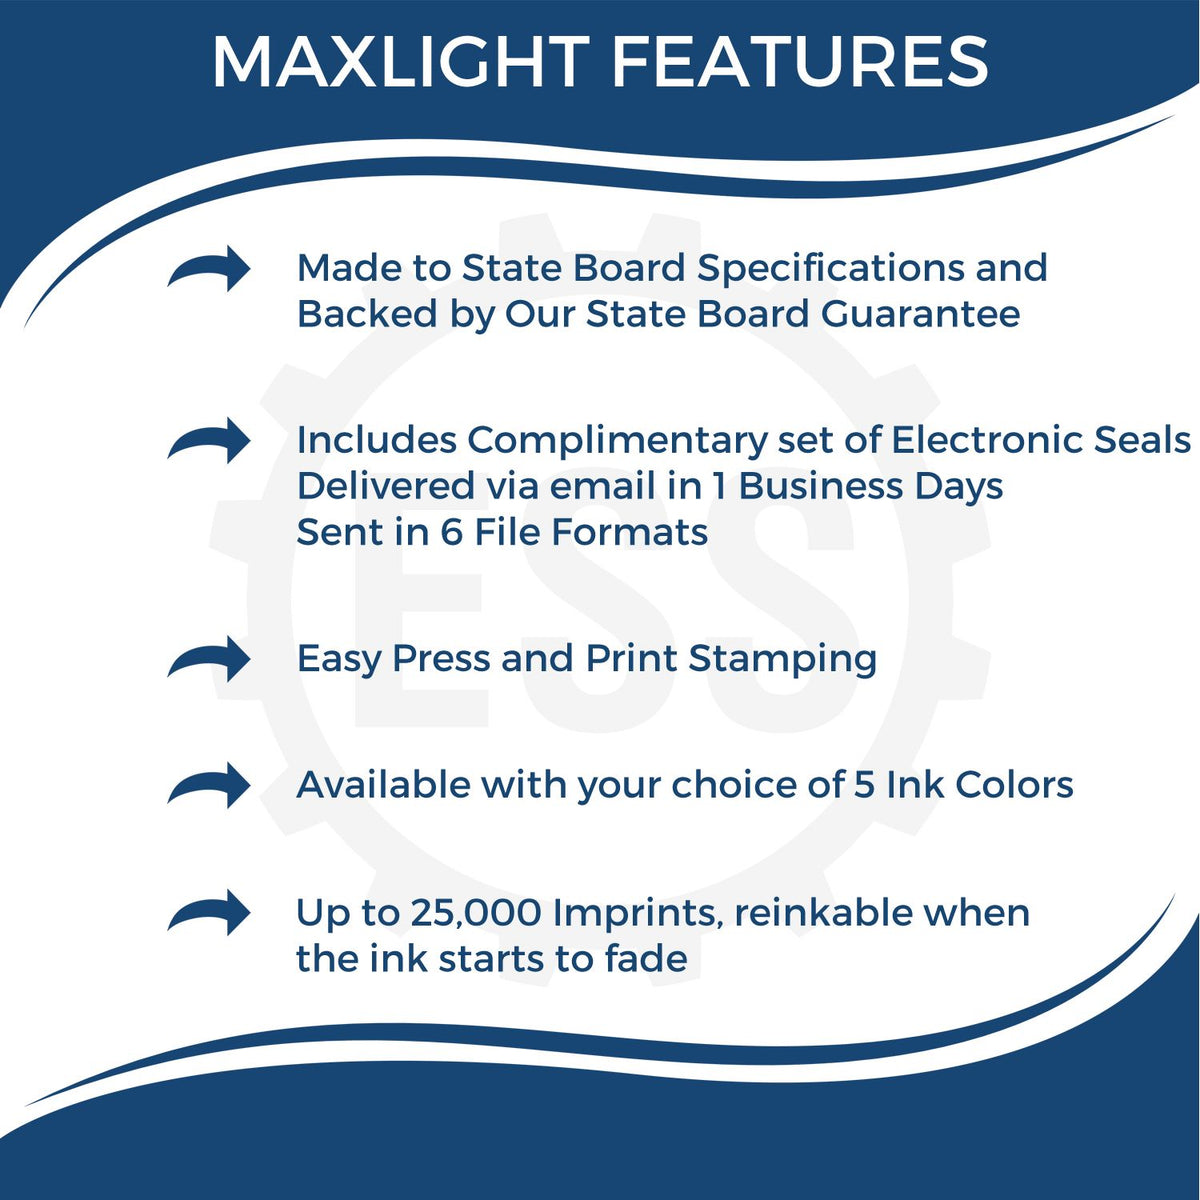 A picture of an infographic highlighting the selling points for the MaxLight Premium Pre-Inked Colorado Rectangular Notarial Stamp